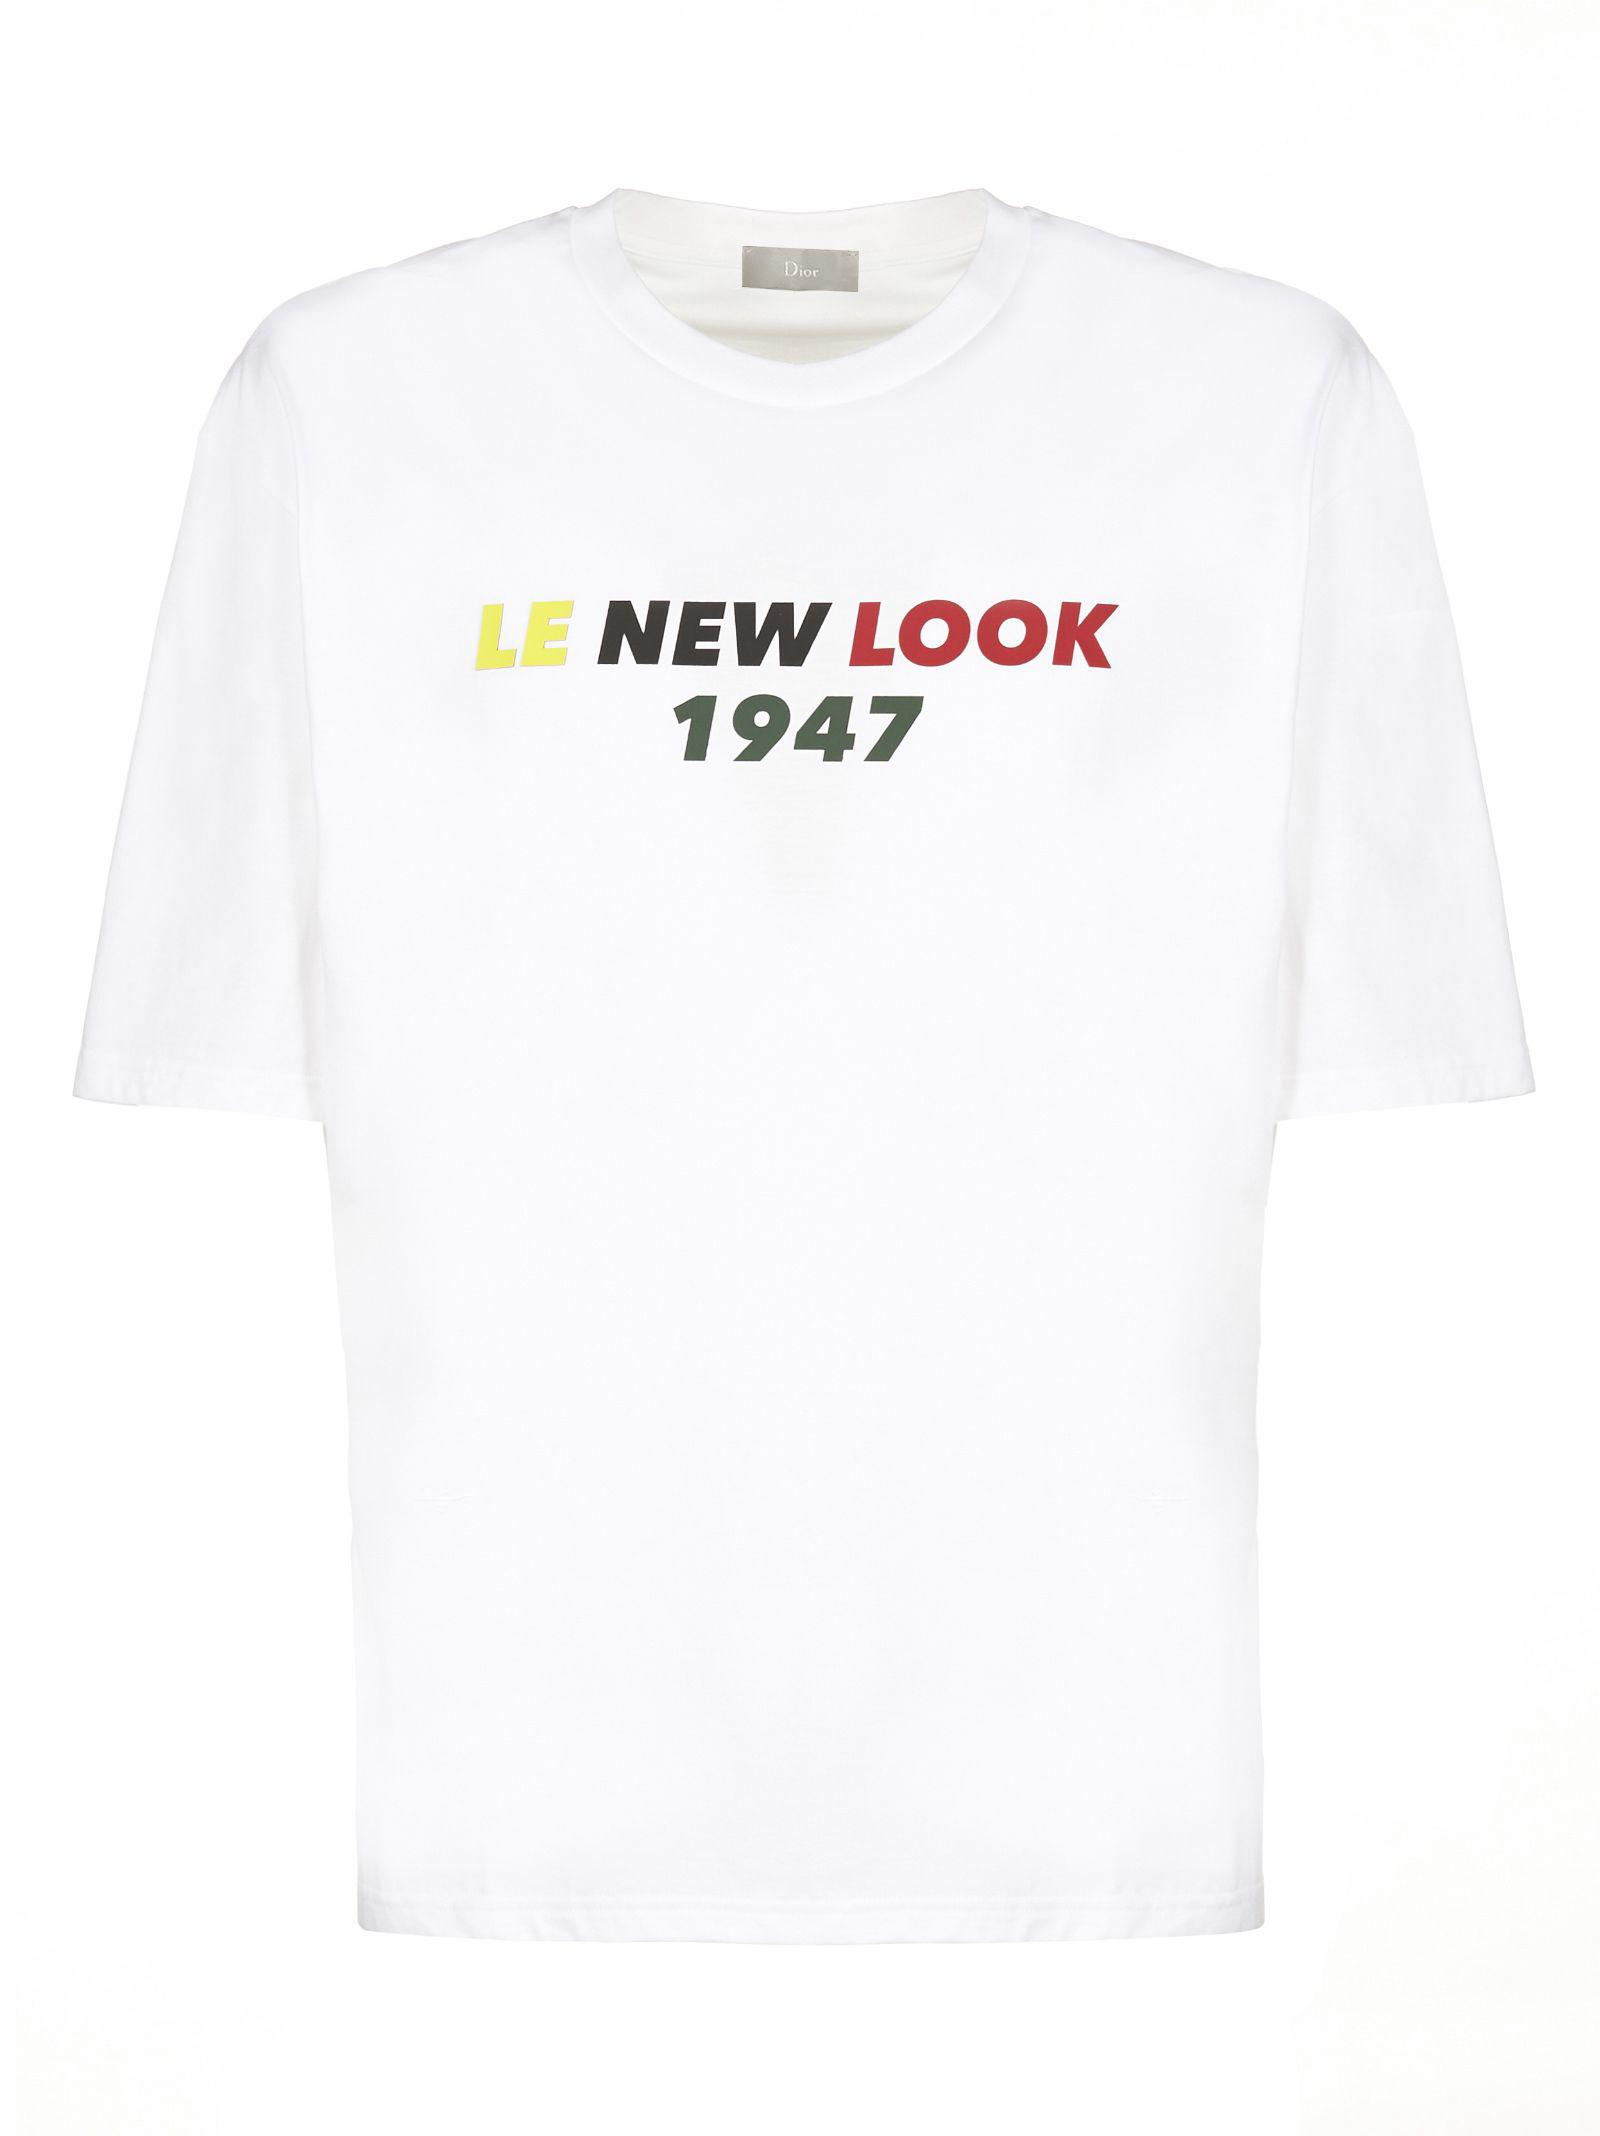 le new look 1947